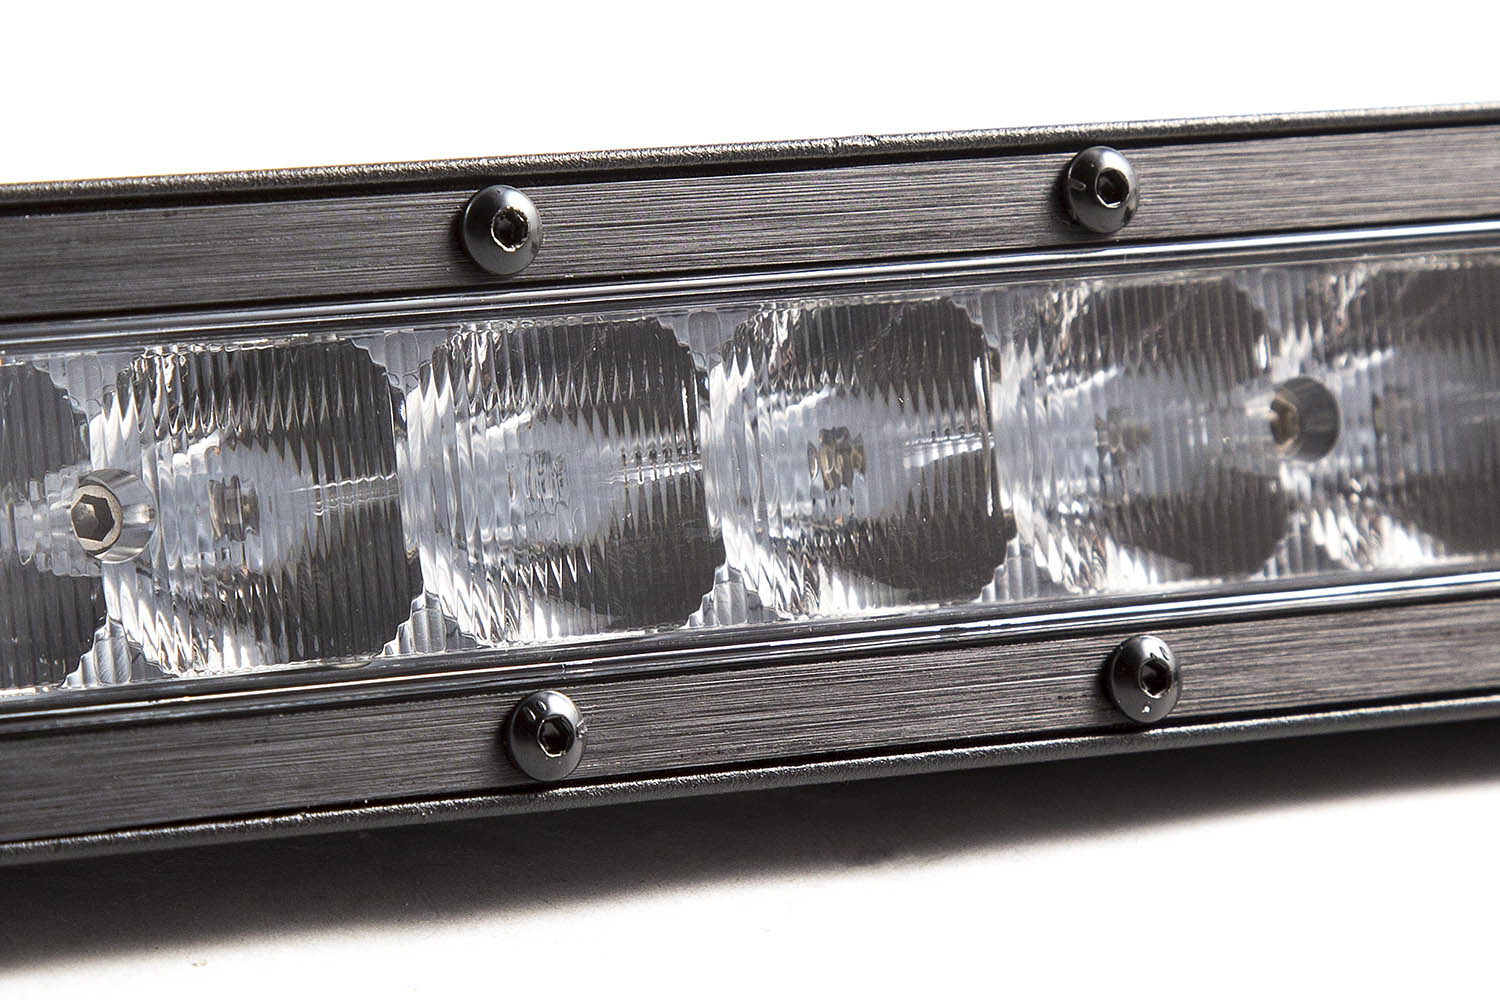 Picture of Diode Dynamics Light bar featuring advanced TIR optics for high efficiency and focus.